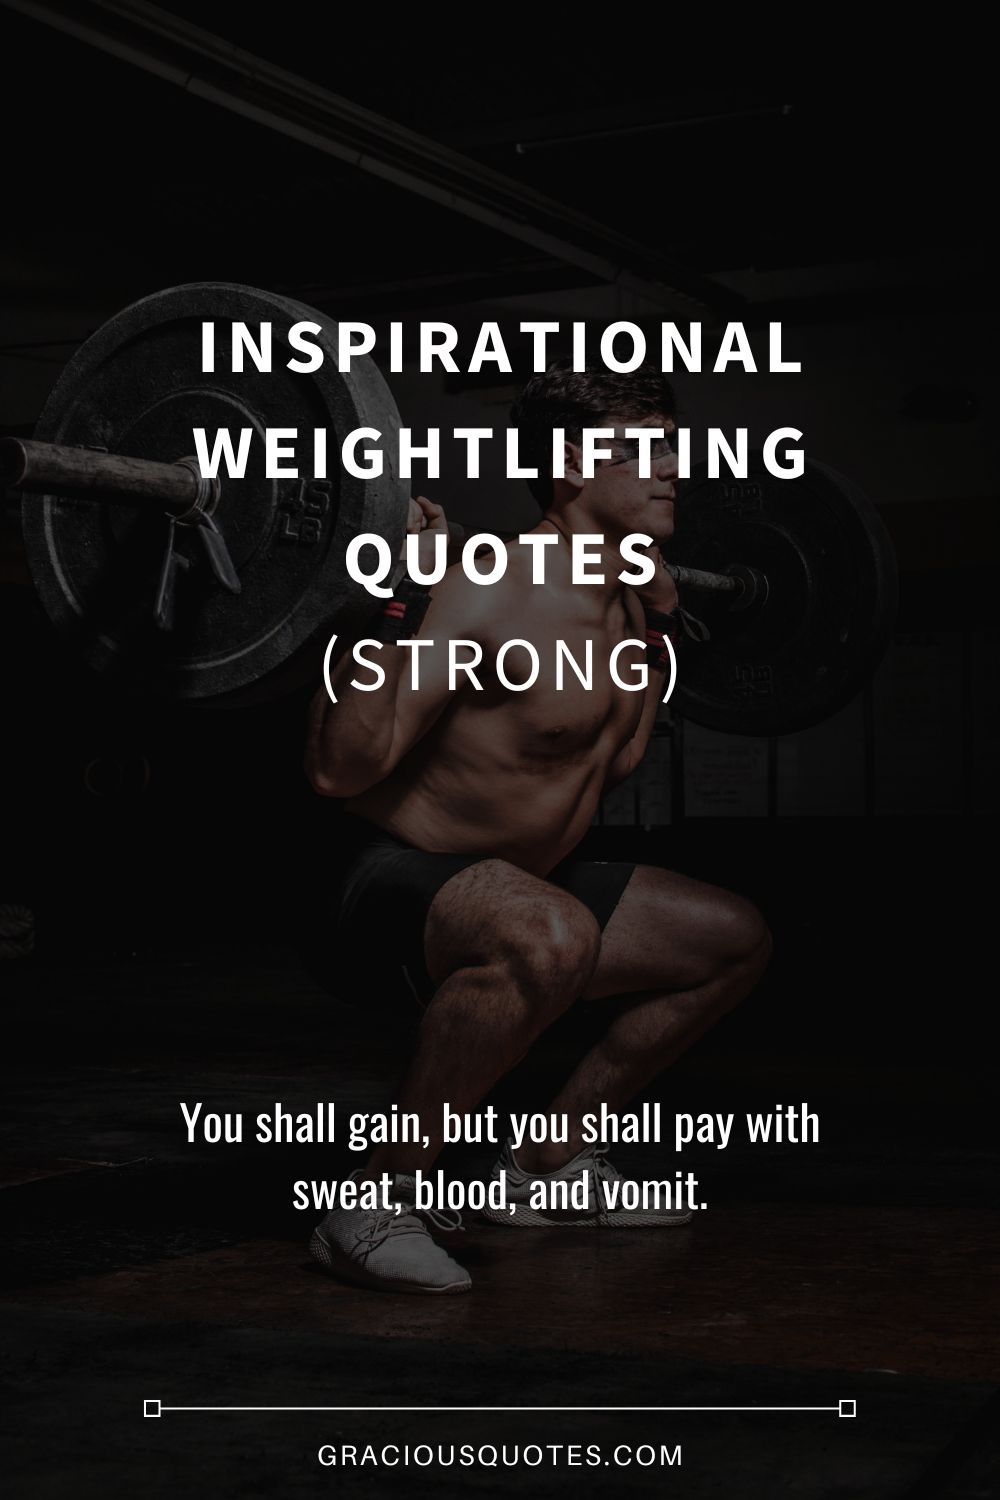 Inspirational Weightlifting Quotes (STRONG) - Gracious Quotes